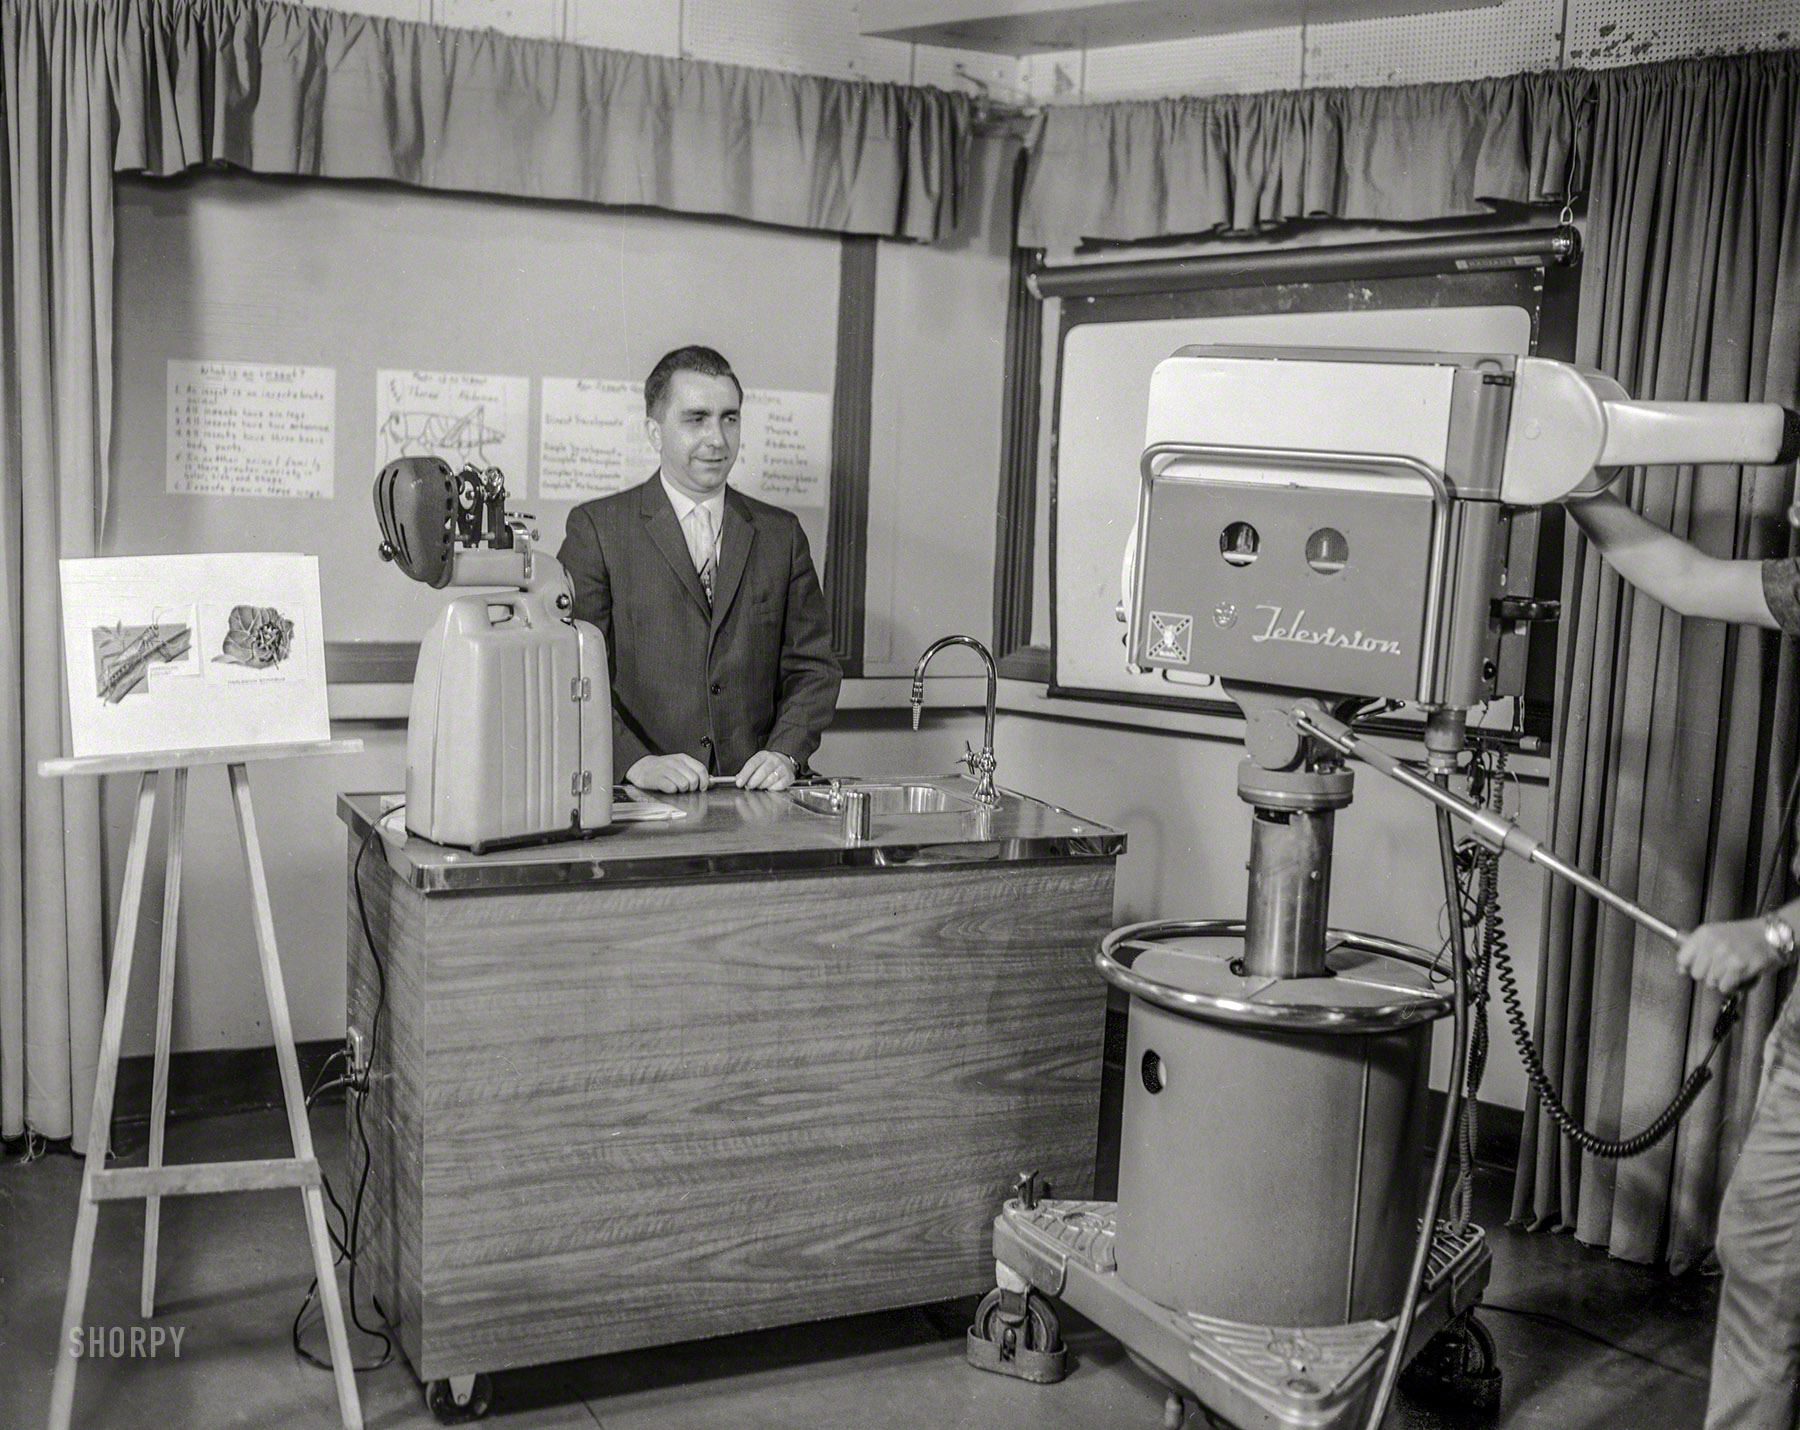 Columbus, Georgia, circa 1957. "TV classroom." Today's lesson: "What is an insect?" 4x5 inch acetate negative from the News Photo Archive. View full size.